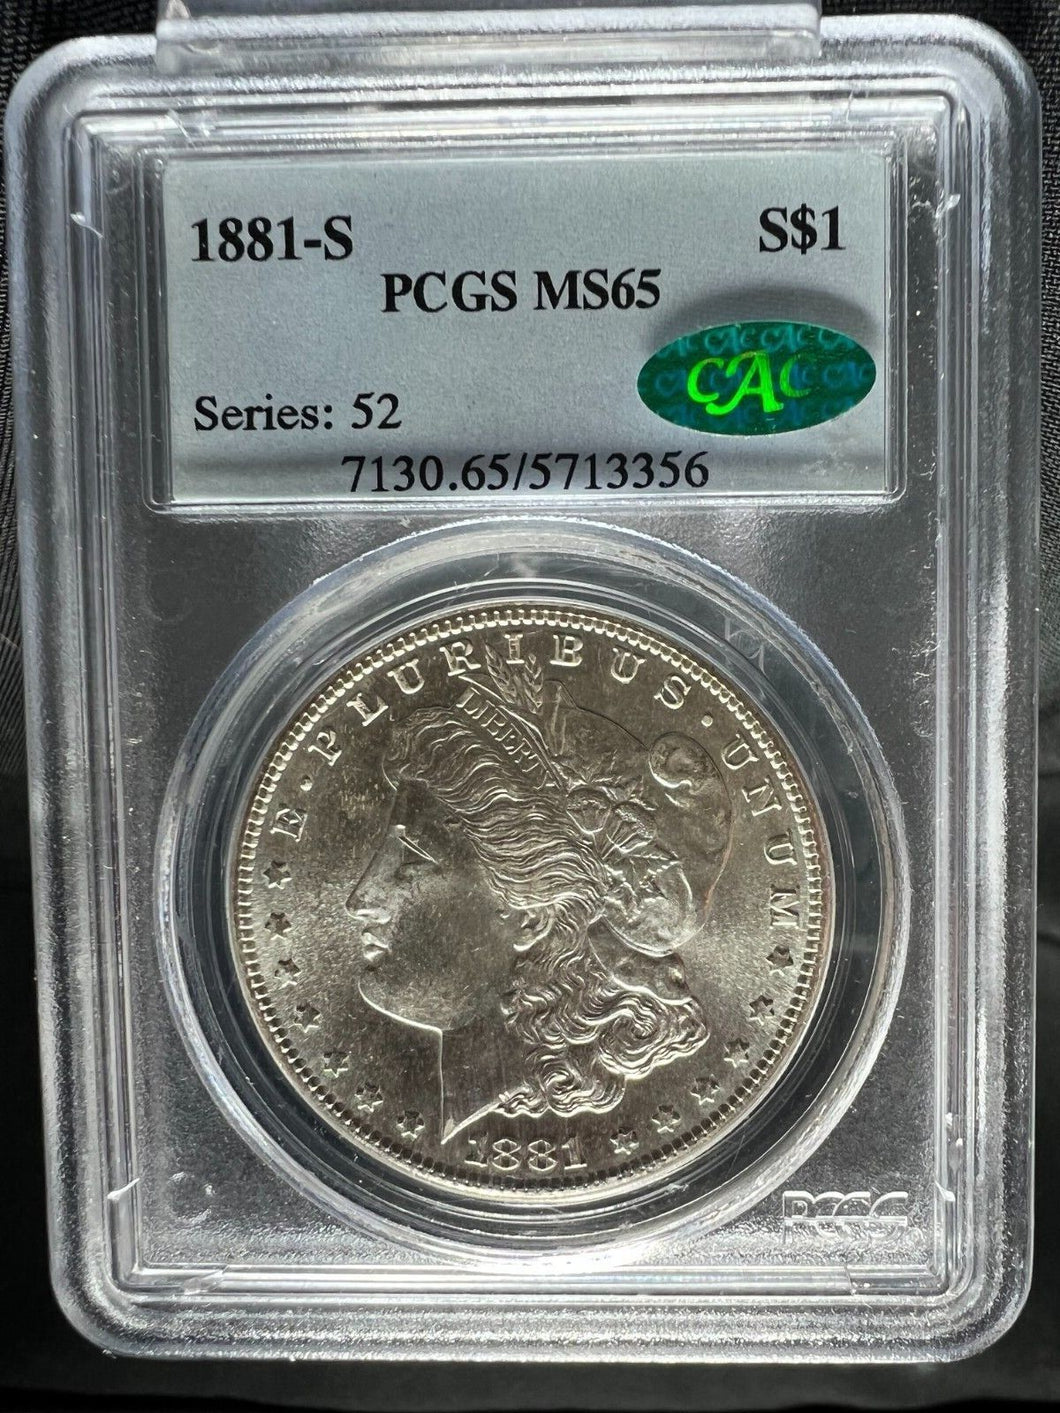 1881-S Morgan Silver Dollar PCGS MS65 (CAC) - -  Lustrous Blast White & Frosty